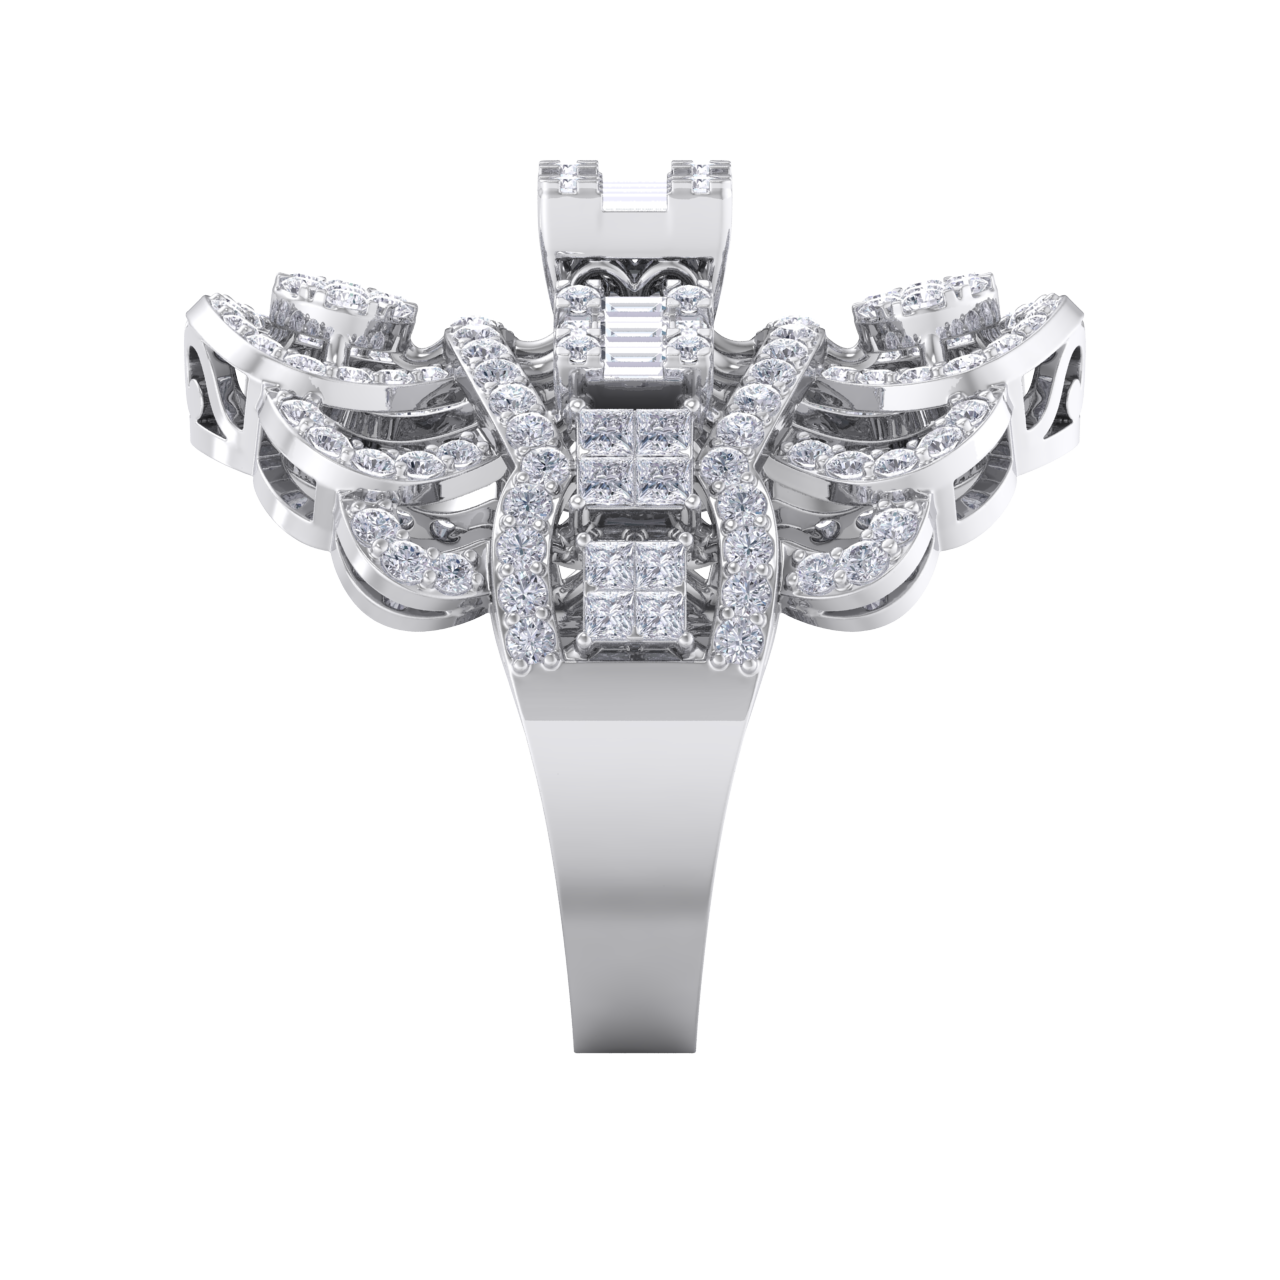 Statement ring in white gold with white diamonds of 1.91 ct in weight